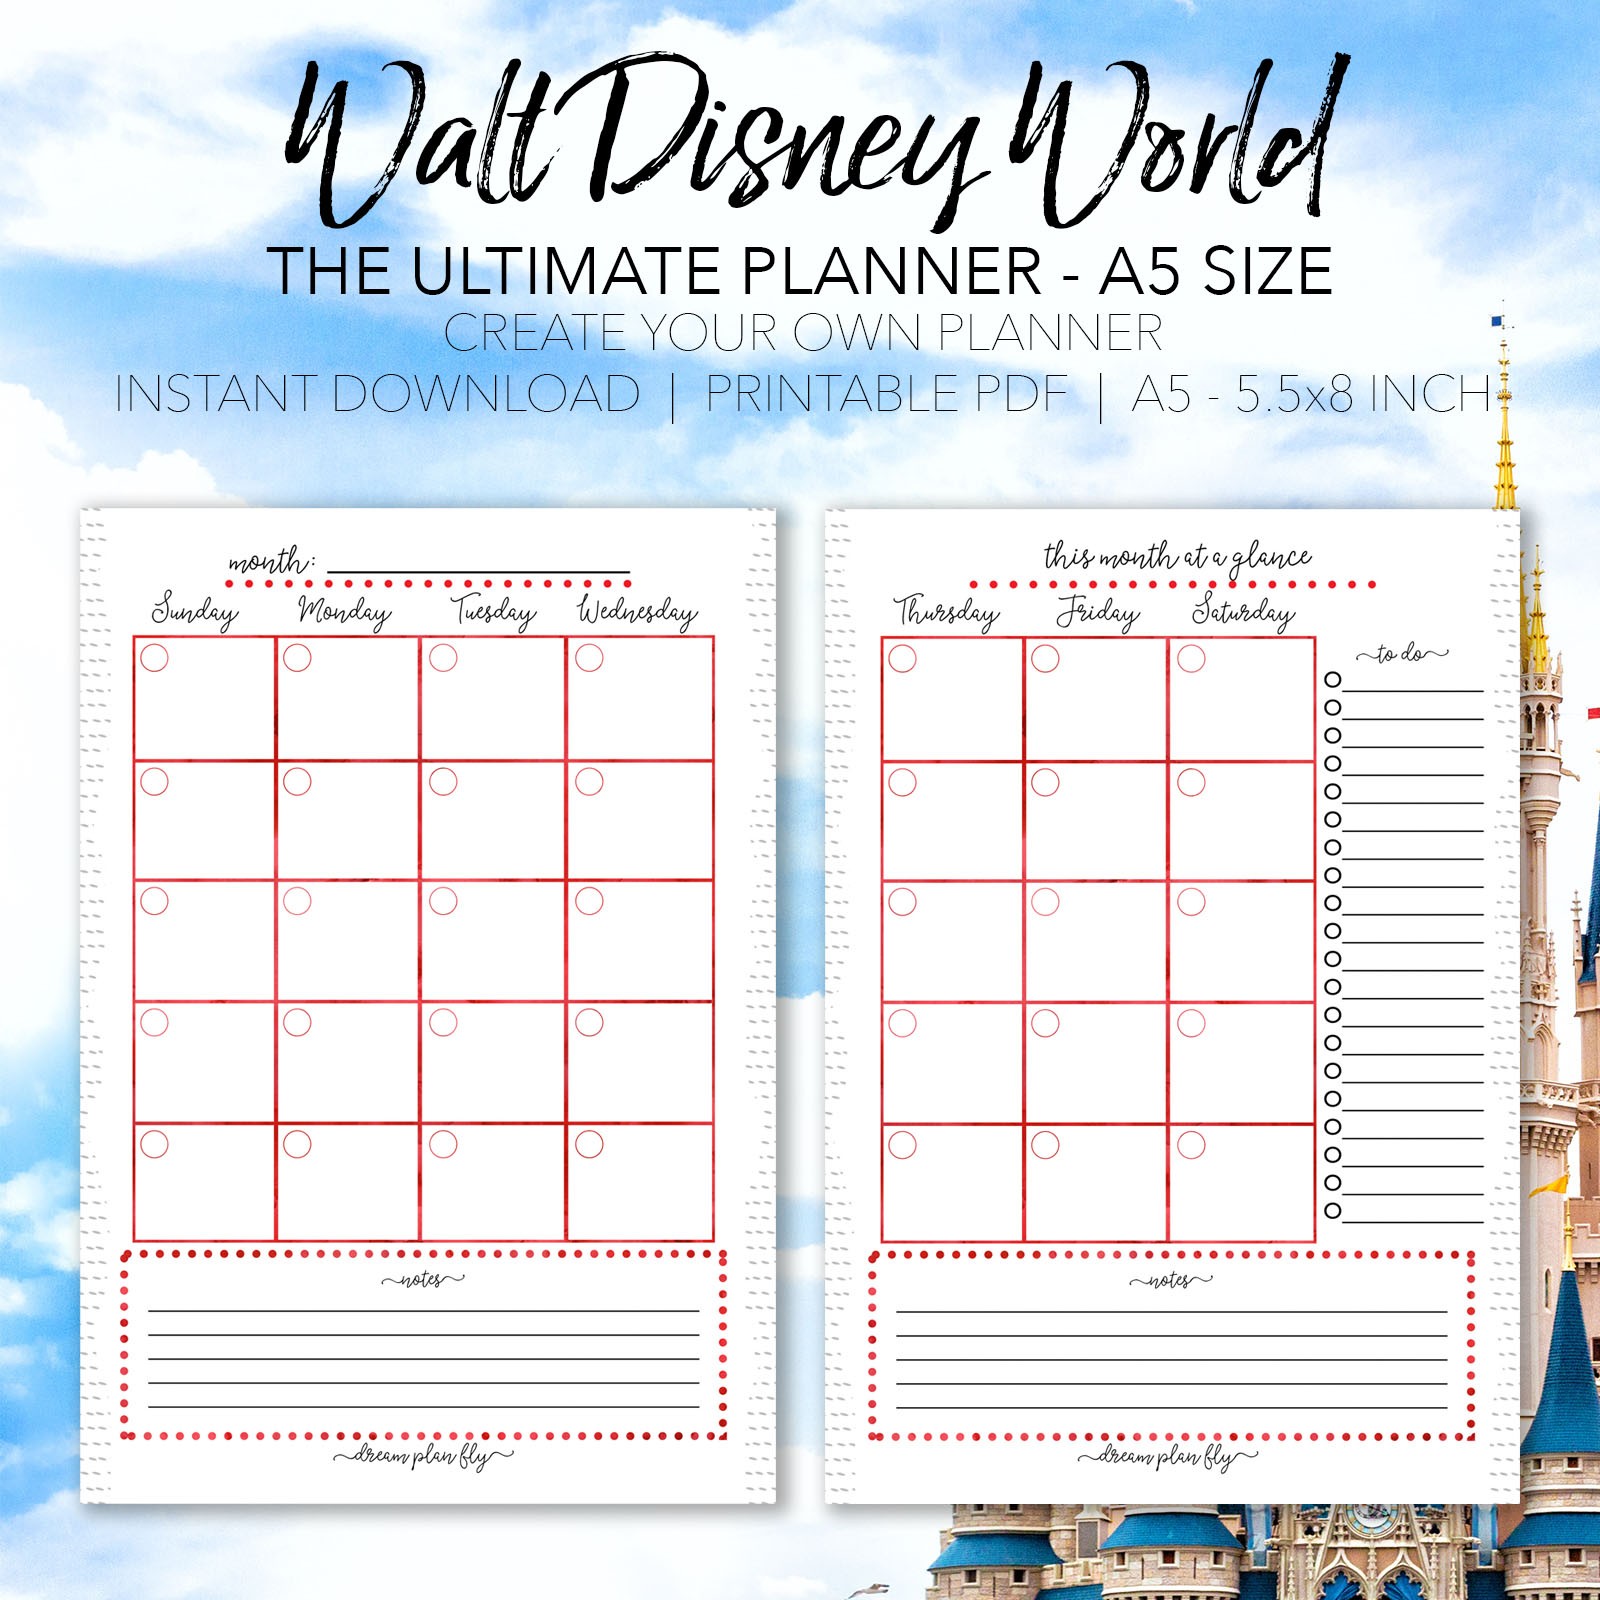 Ultimate Walt Disney World Vacation Planner A5 Size Dream Plan Fly Document